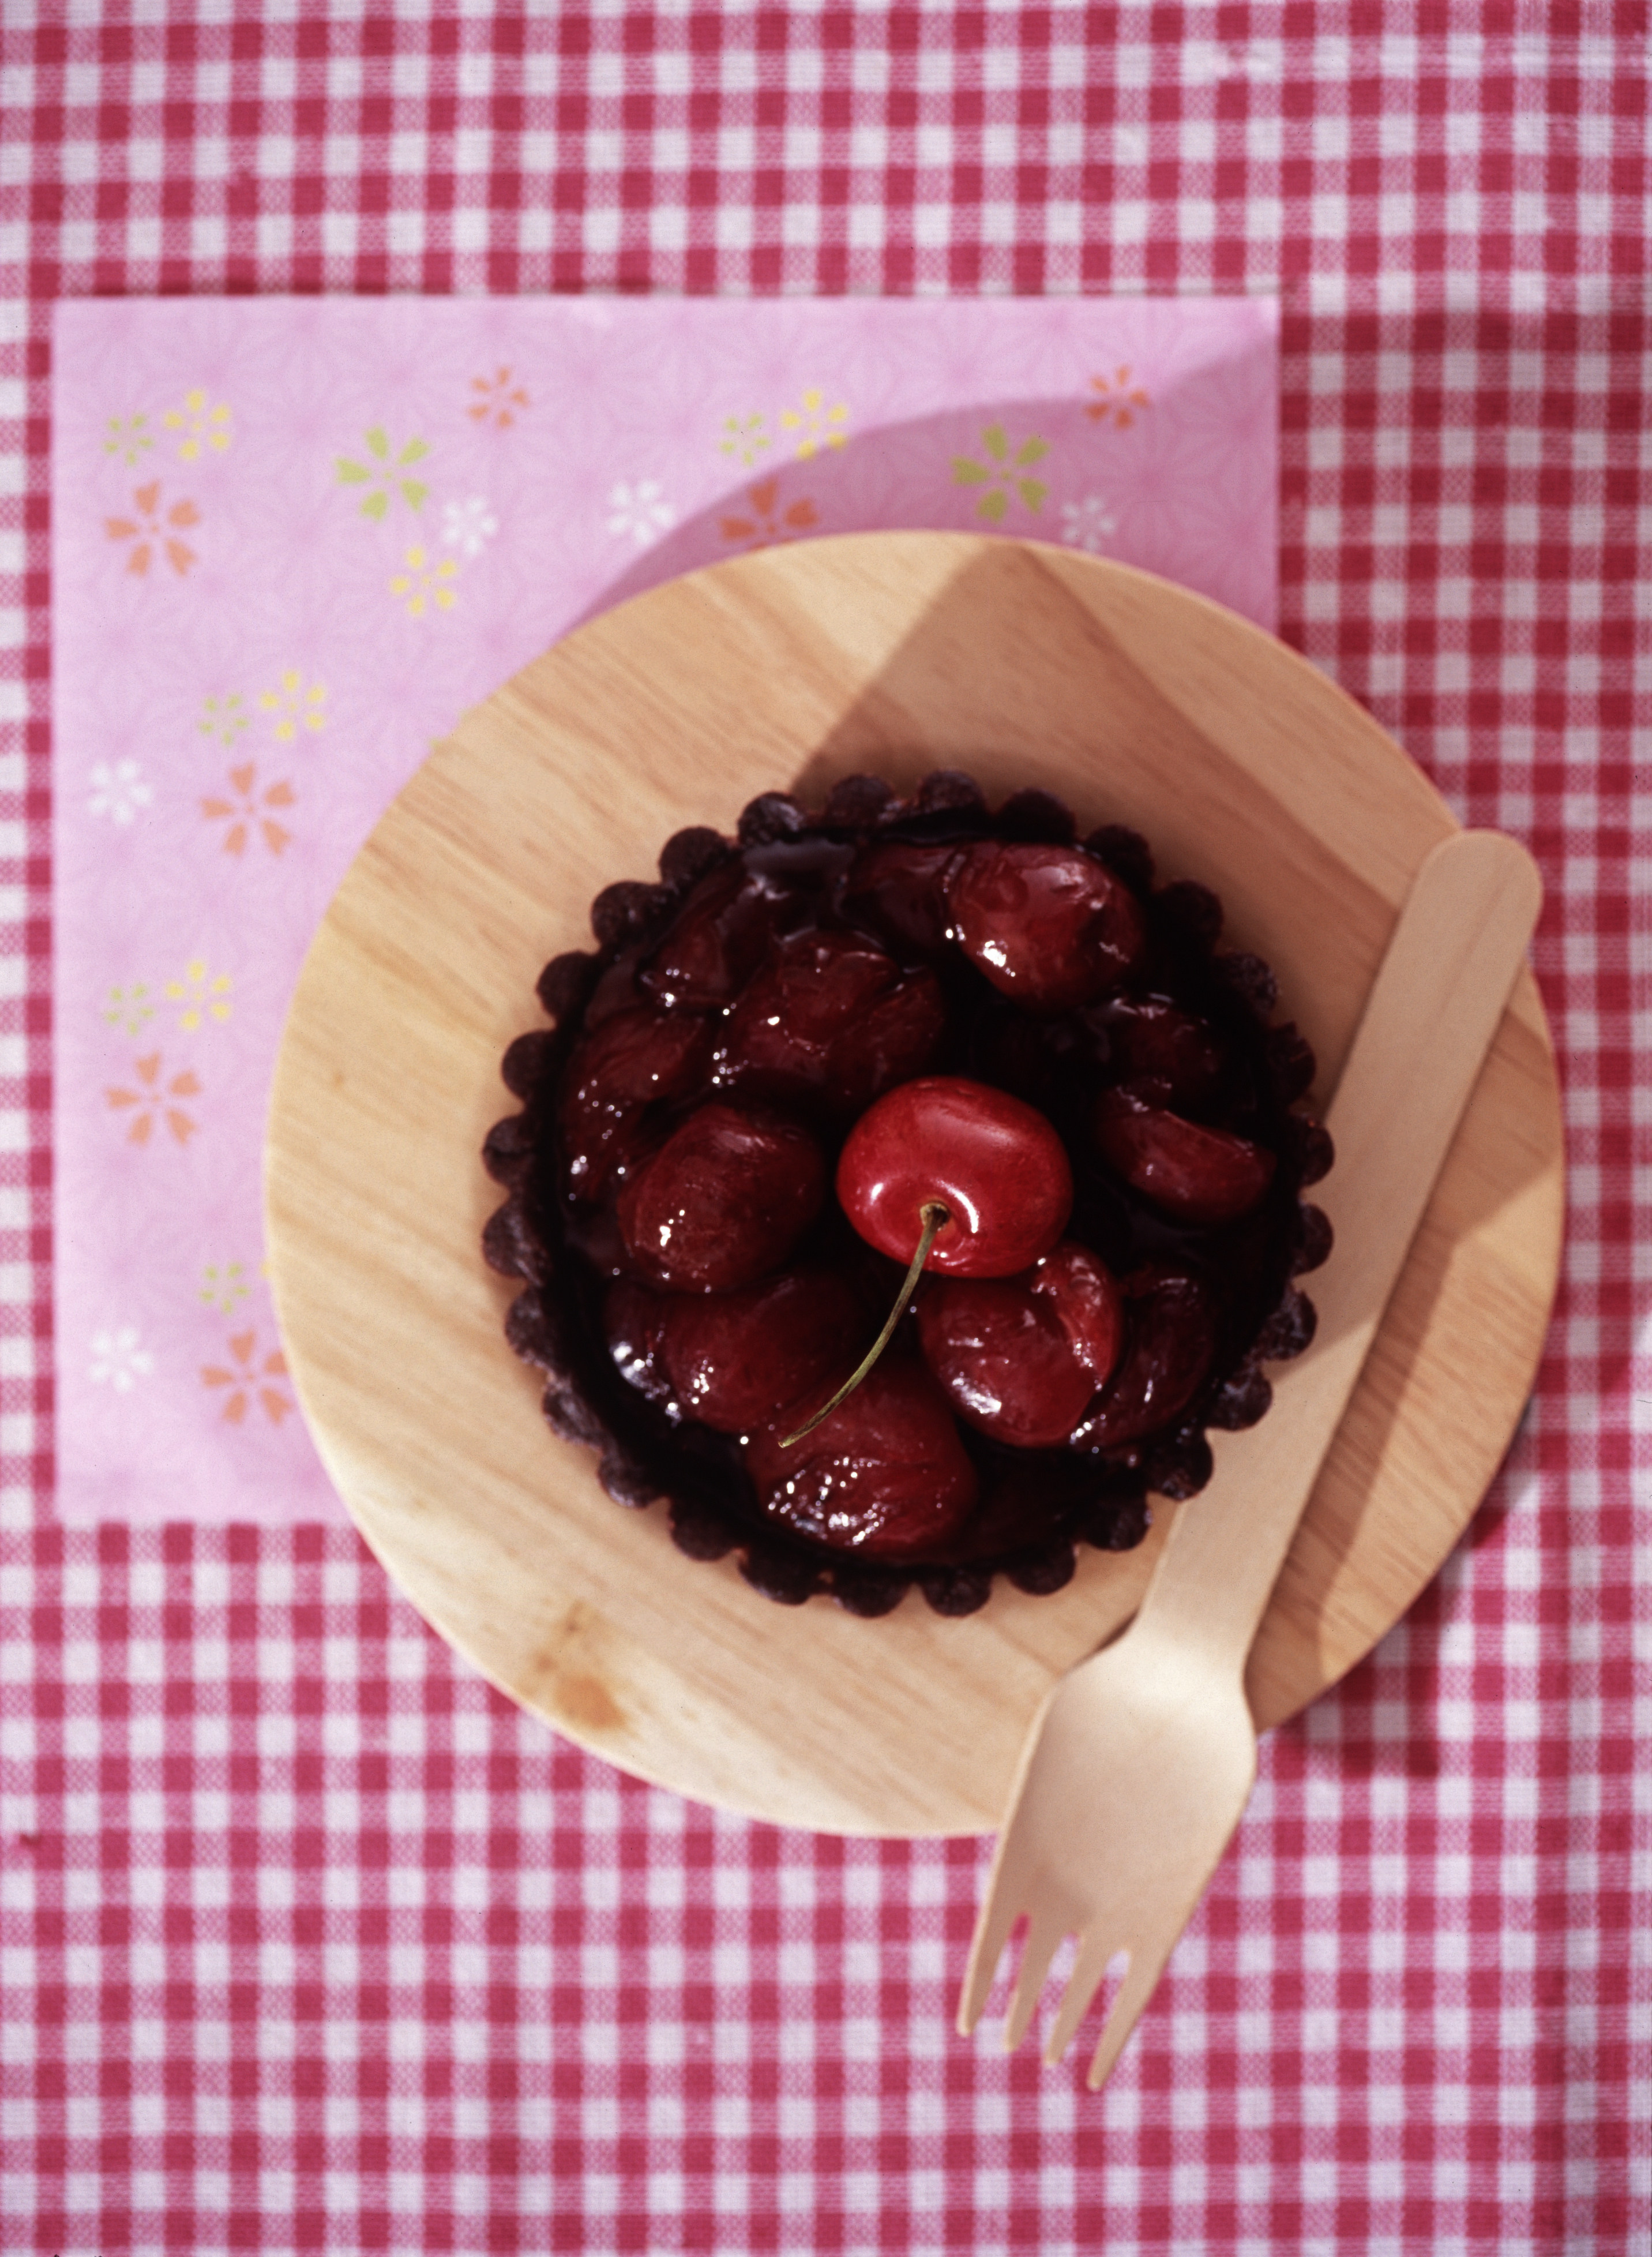 This double-chocolate cherry tart is rich and decadent, and best served warm from the oven. Photo: Koji Studio